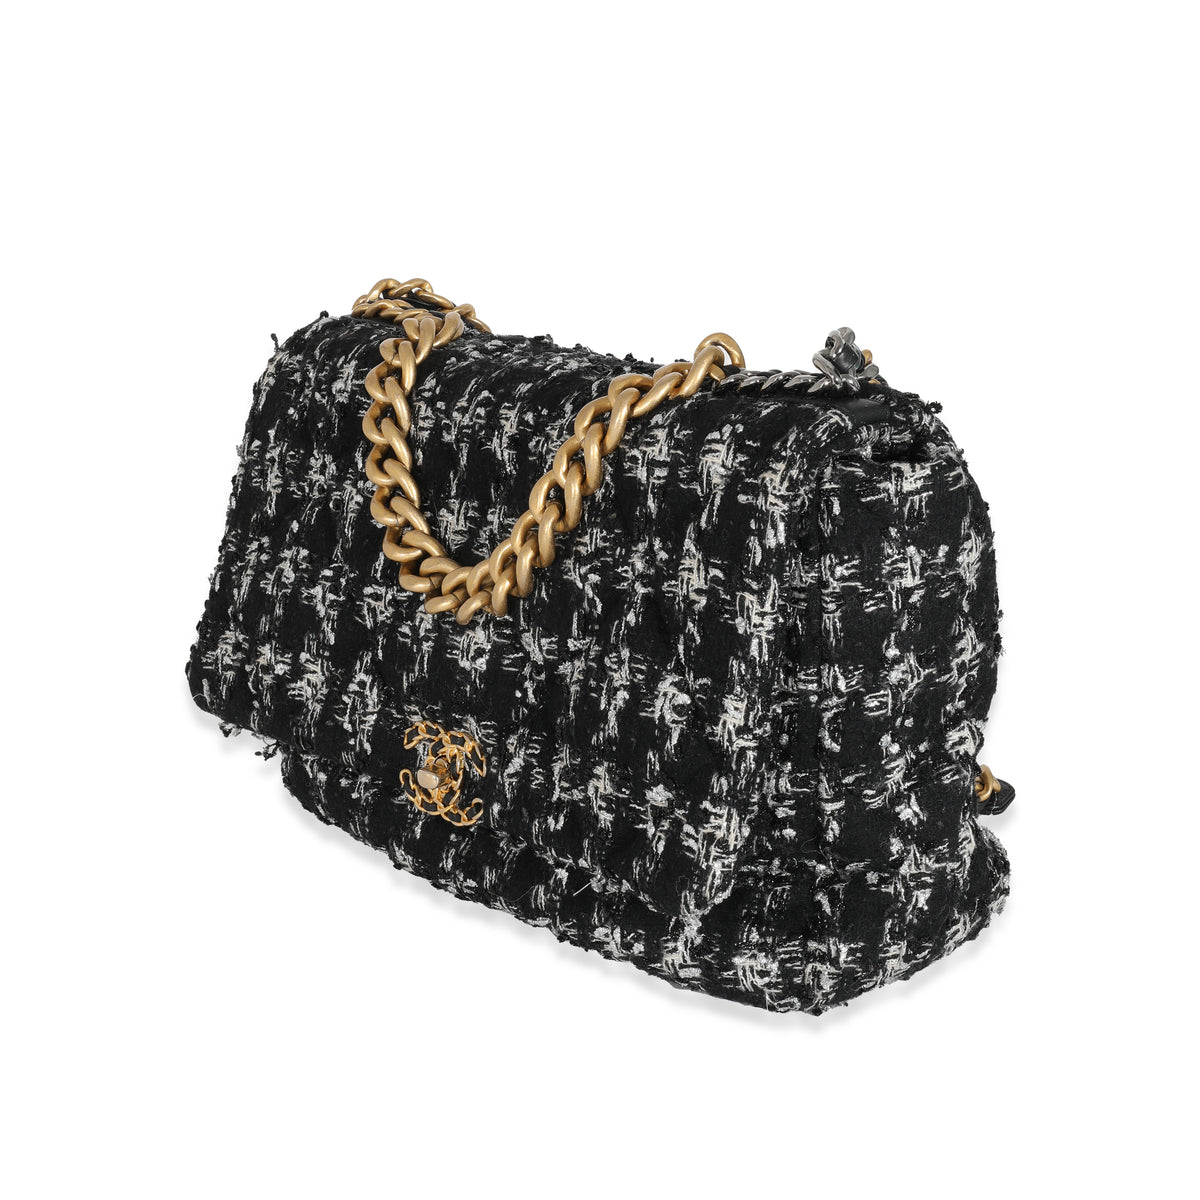 Only 2678.00 usd for CHANEL 19 Maxi Flap Bag in Beige Black Houndstooth  Tweed Online at the Shop